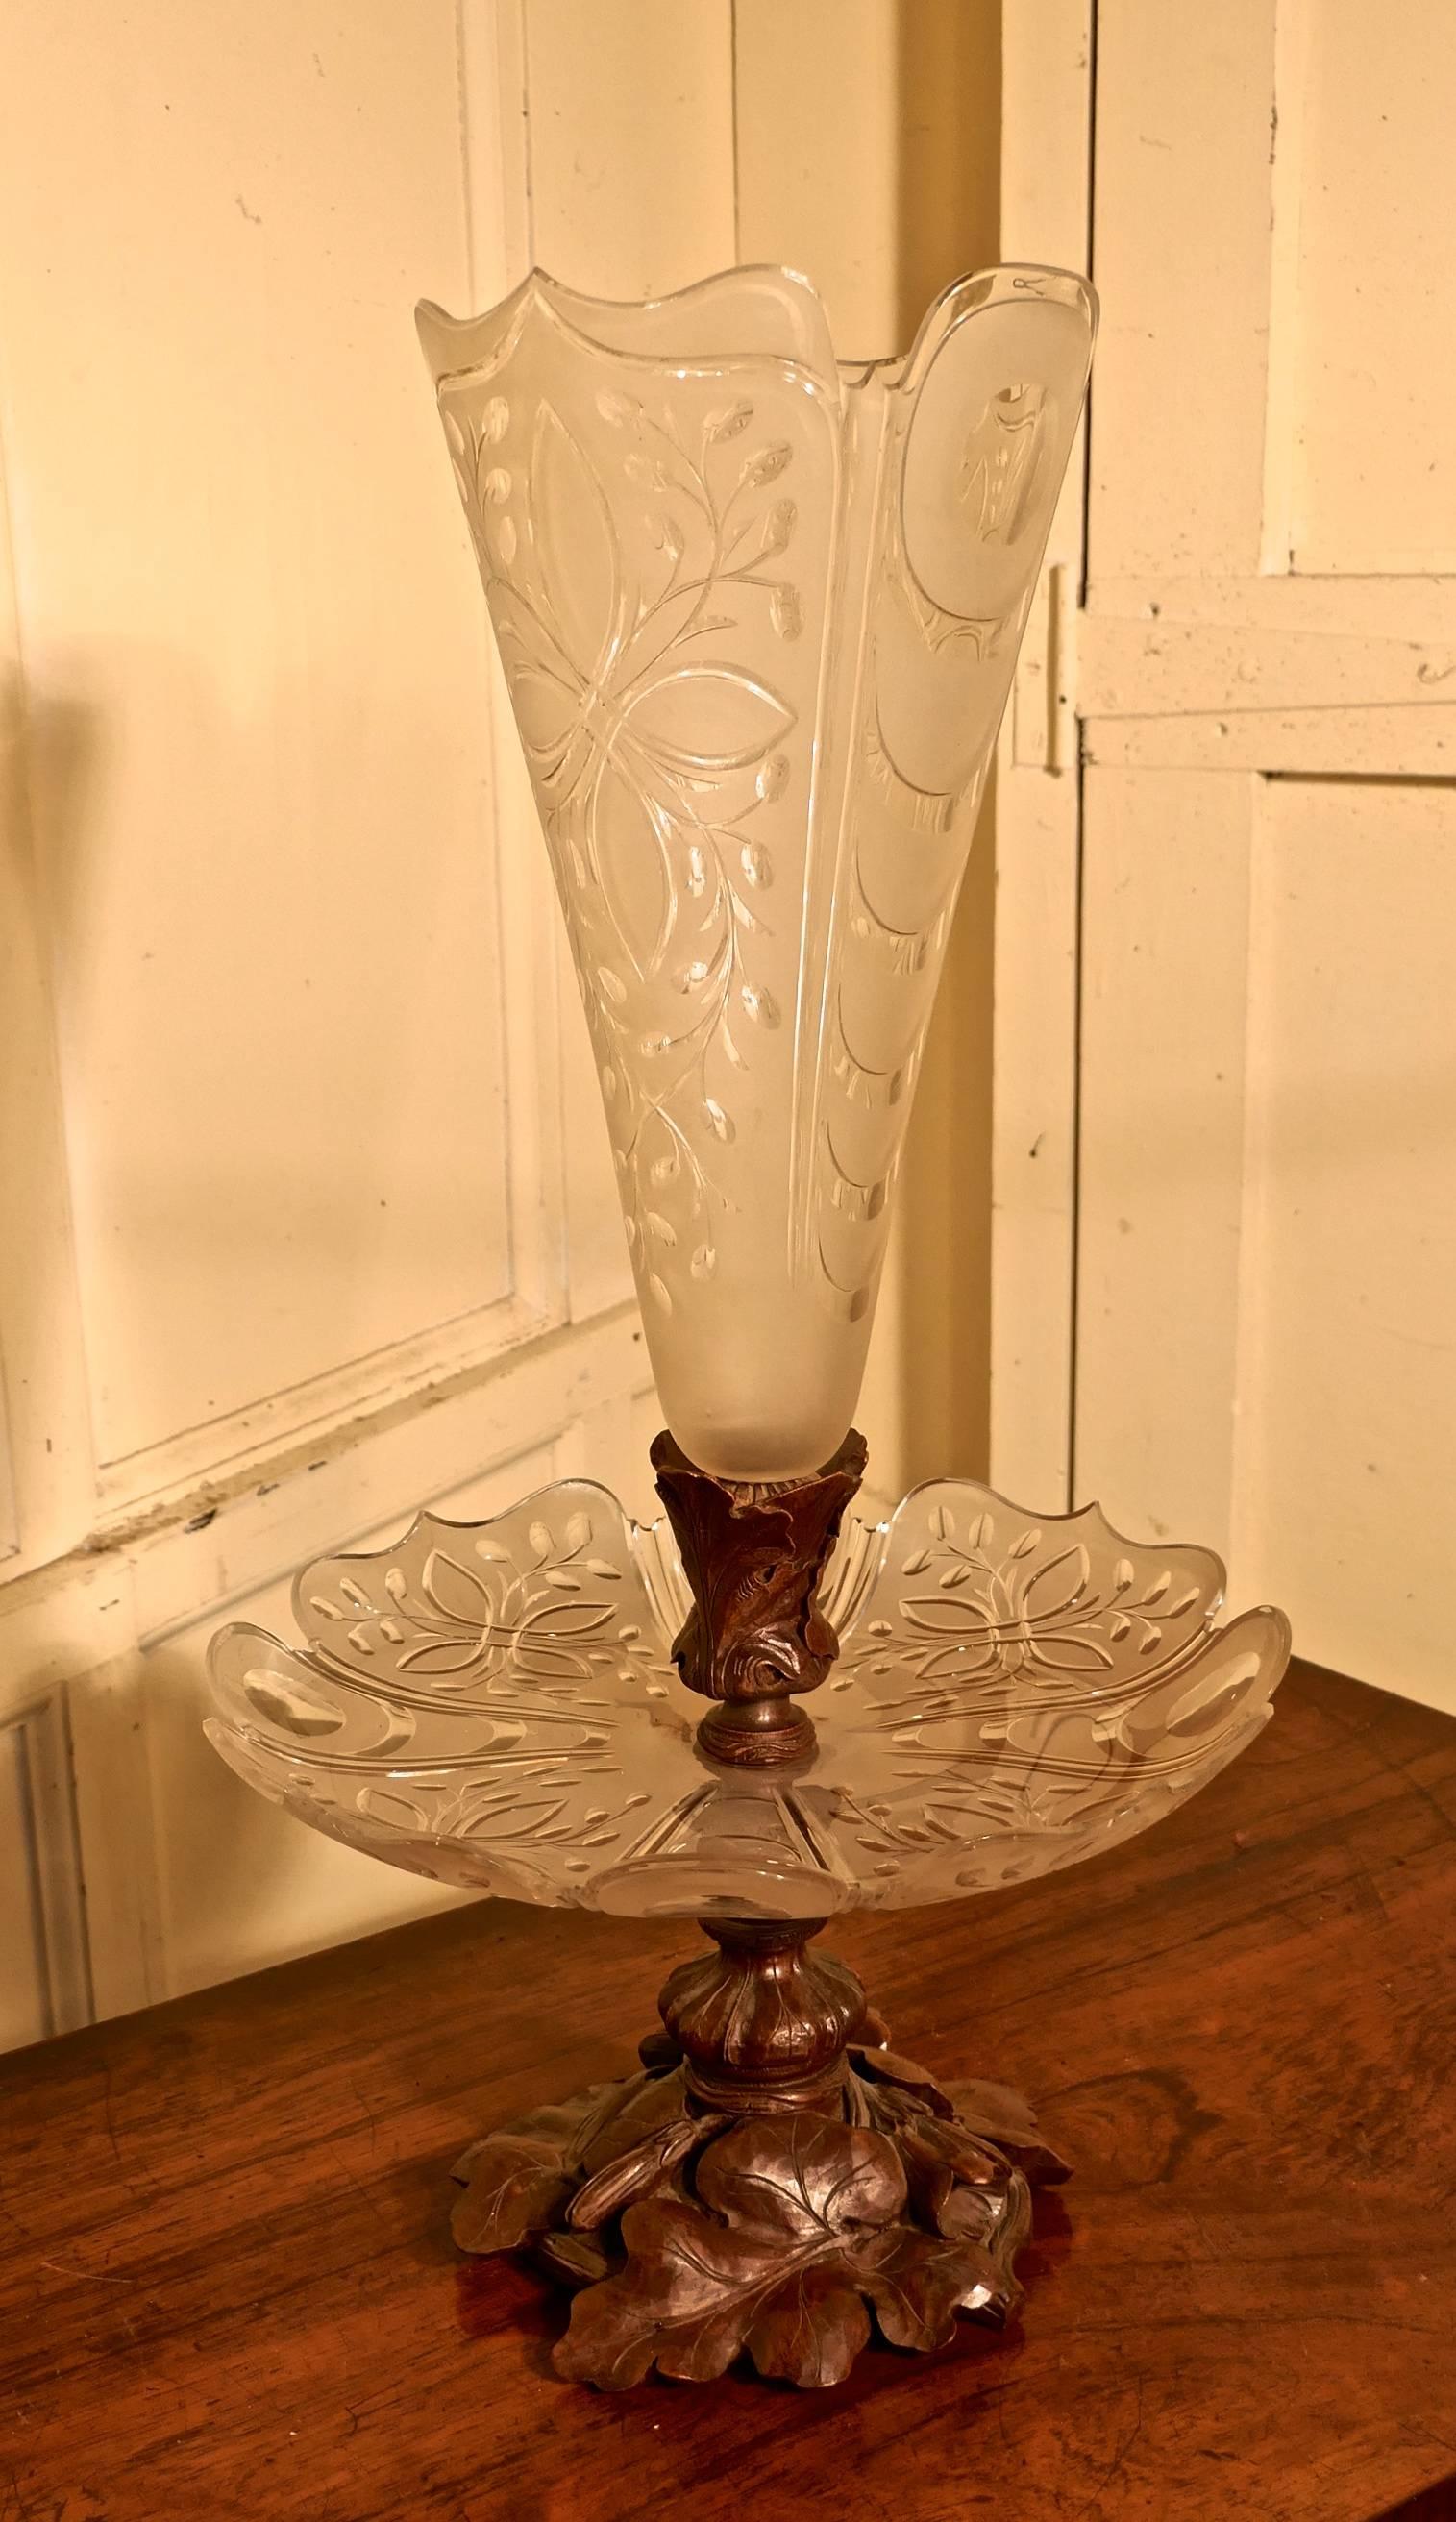 19th century Baccarat crystal epergne, Black Forest centrepiece

A superb and very unusual combination, a Black Forest pedestal carved with oak leaves, mounted with an etched crystal dish, which in turn has another Black Forest carved mount